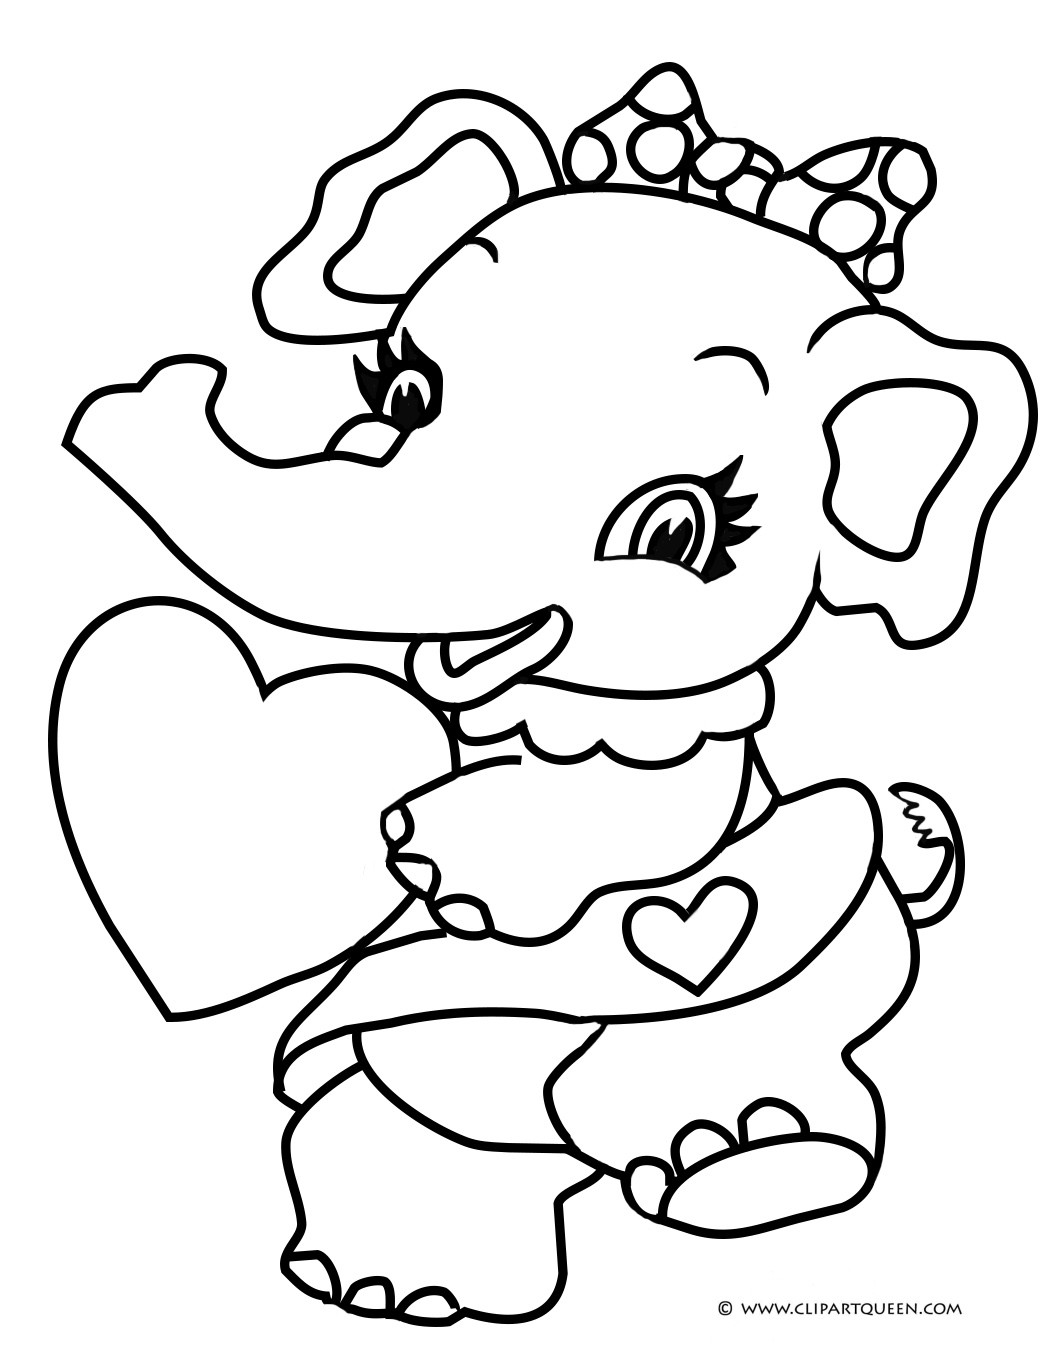 Valentines Day Coloring Pages For Kids
 15 Valentine s Day coloring pages